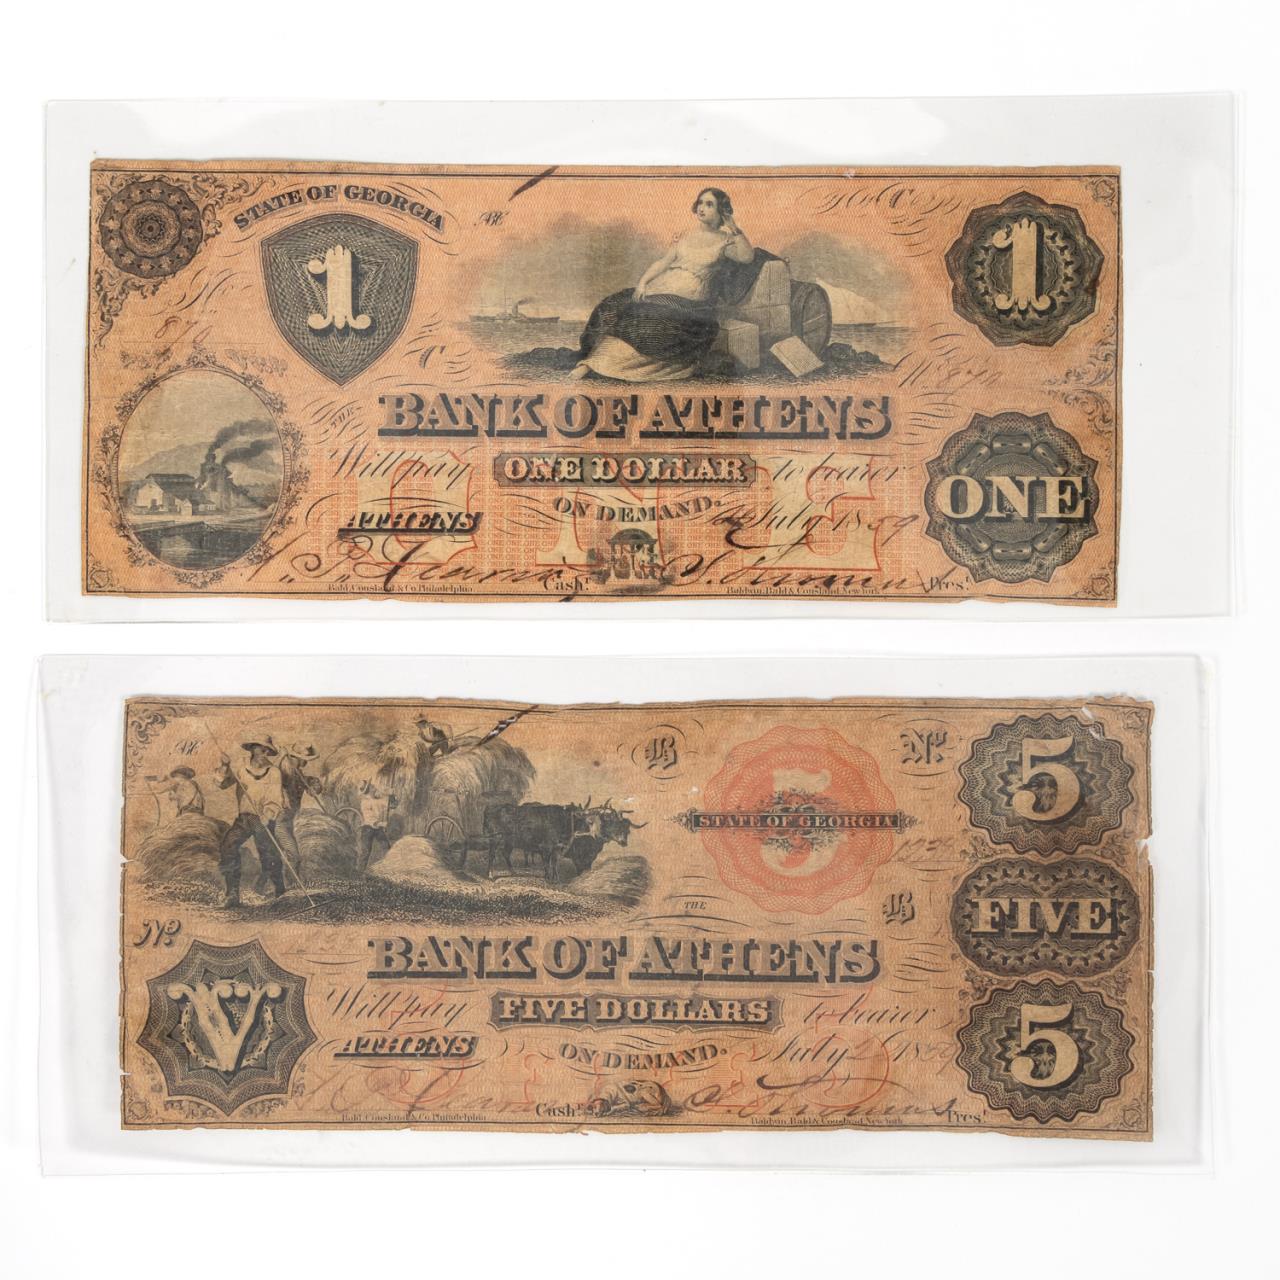  BANK OF ATHENS OBSOLETE NOTES  35e1f1